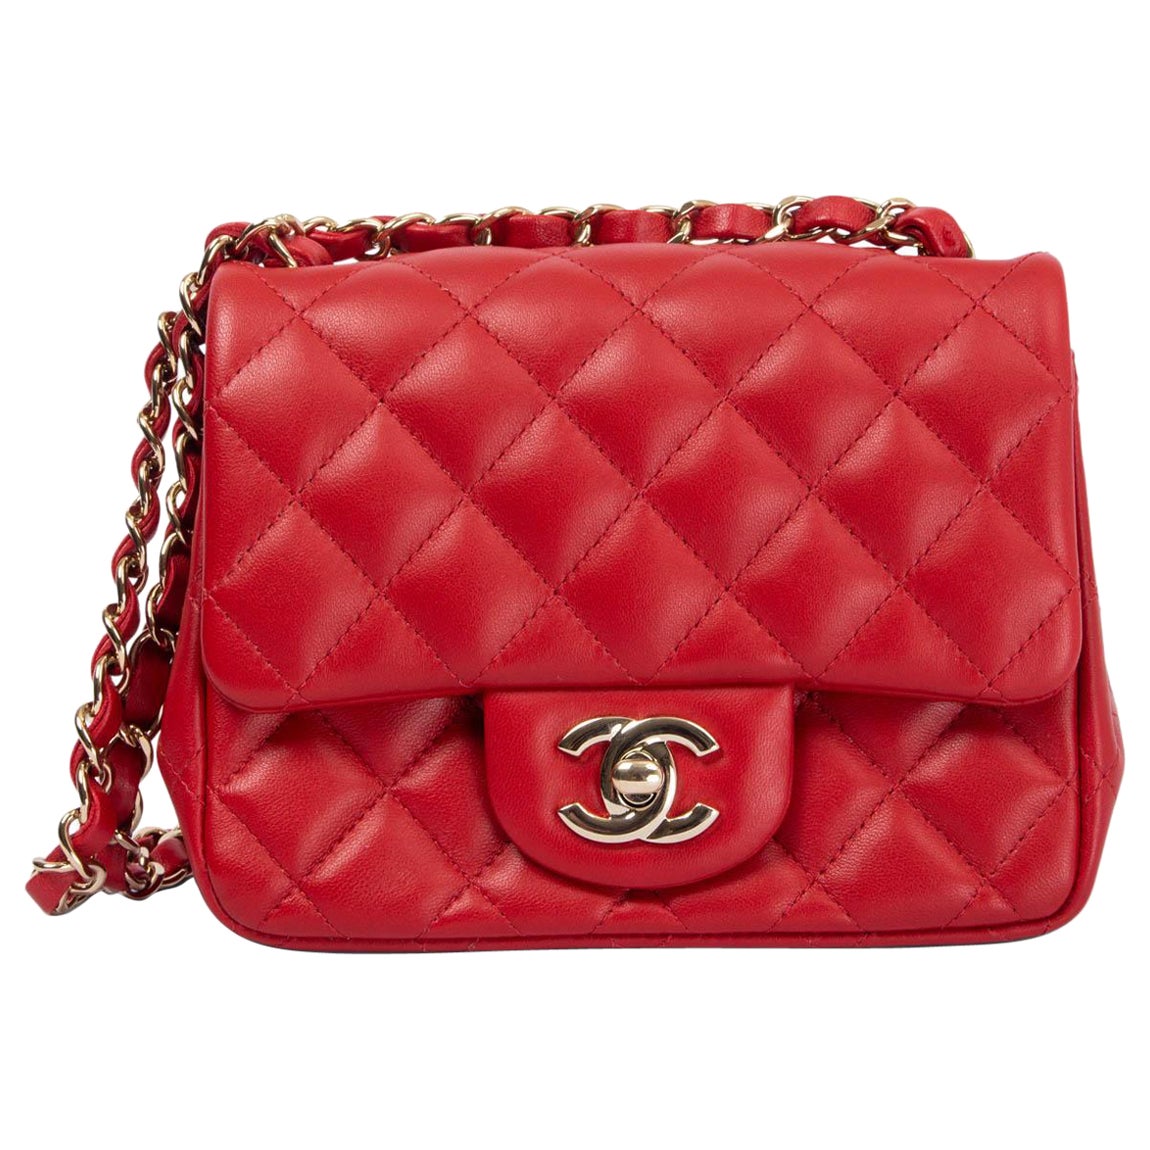 CHANEL red quilted leather 2020 20S MINI SQUARE FLAP Shoulder Bag